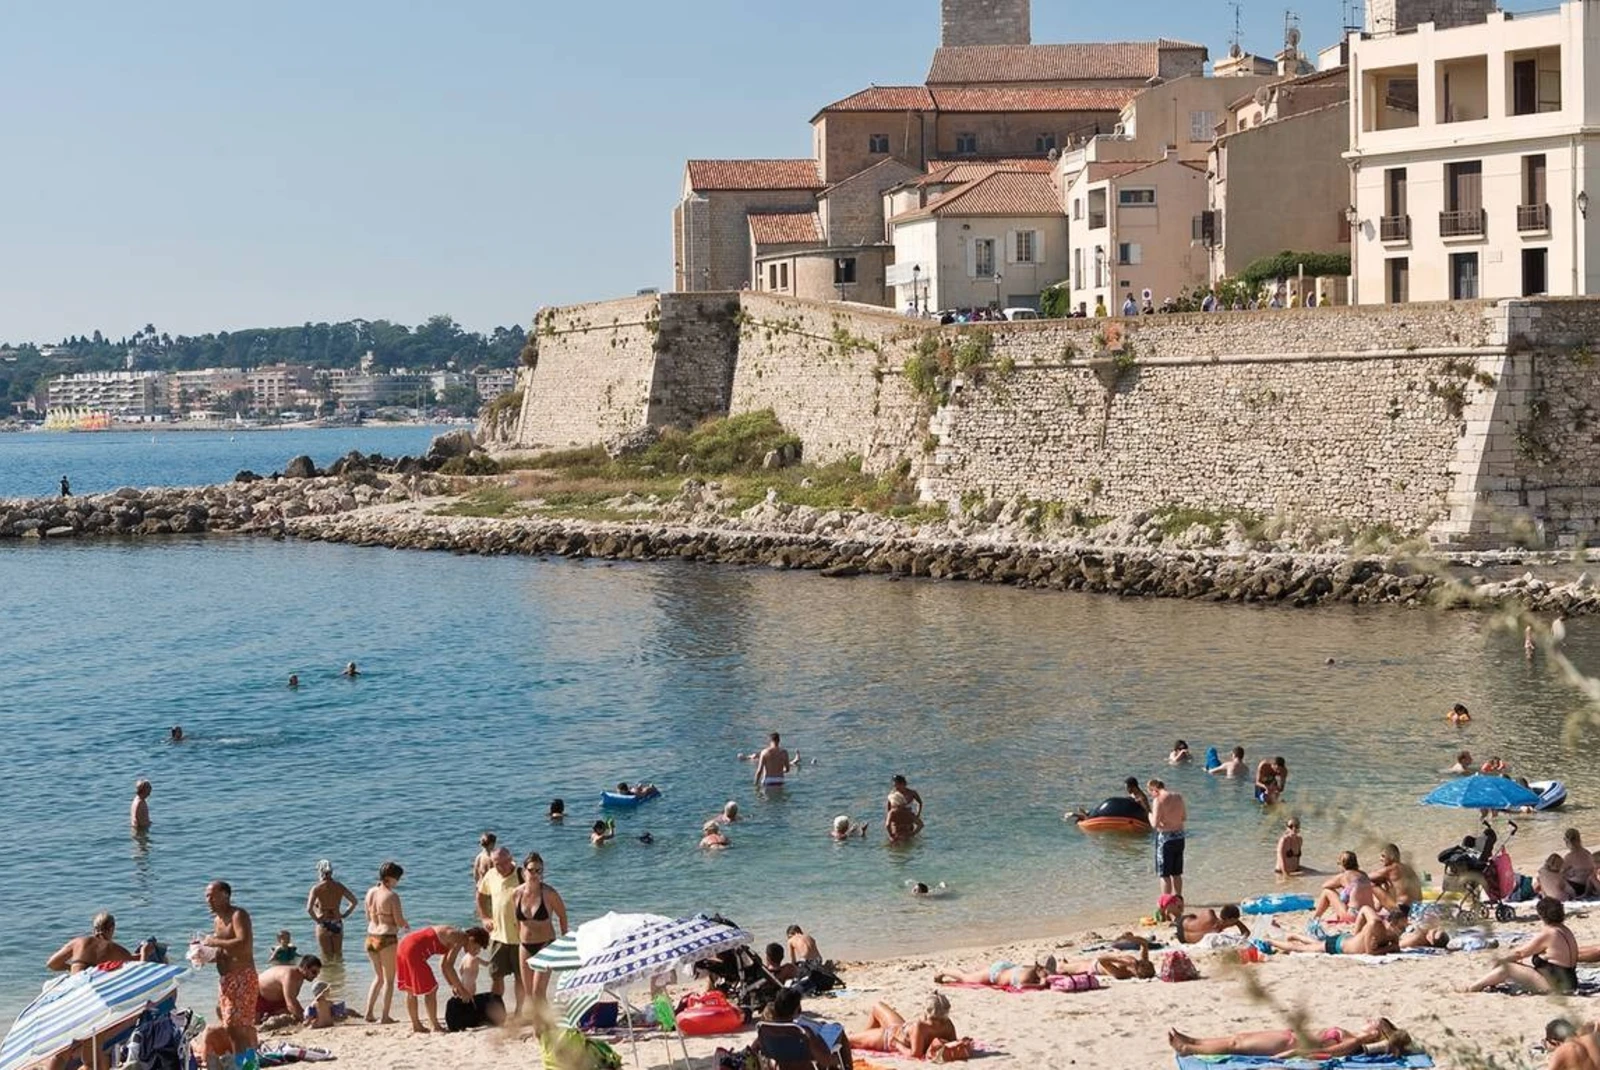 Plage de la Gravette is a beautiful and family-friendly sandy beach located in Antibes, France.